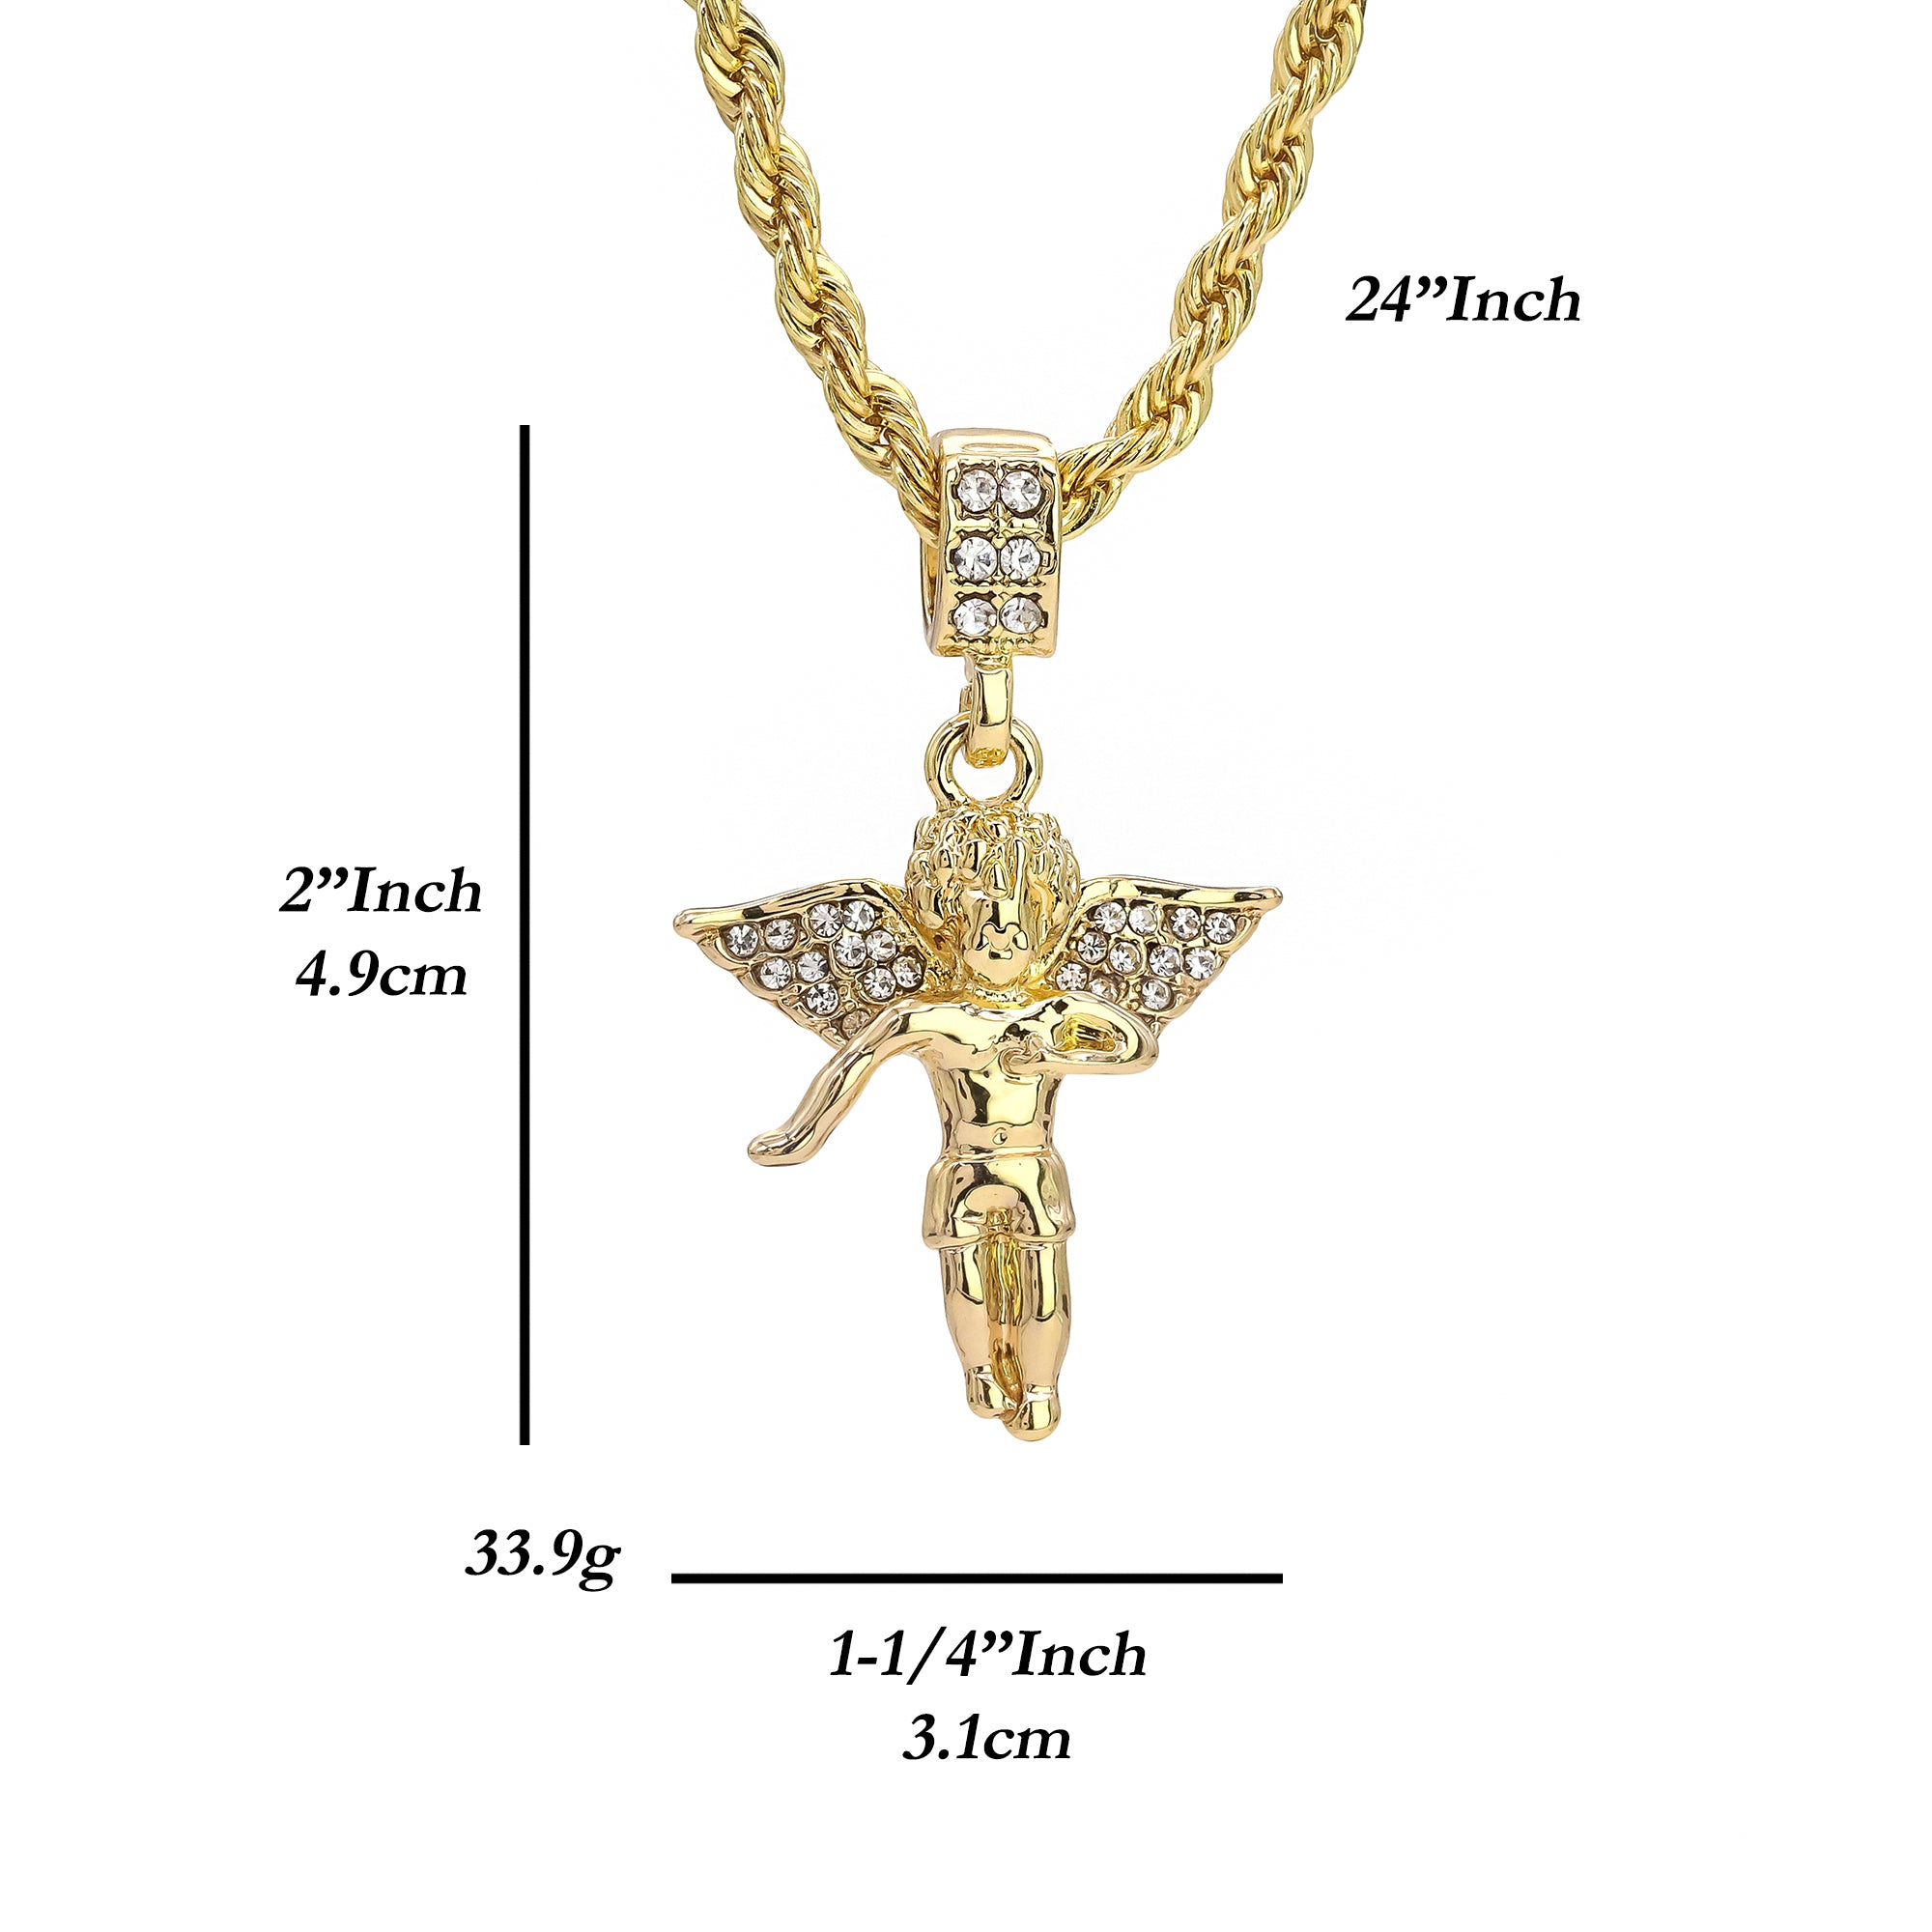 Angel Pendant 24" Rope Chain Hip Hop 18k Jewelry Necklace J1